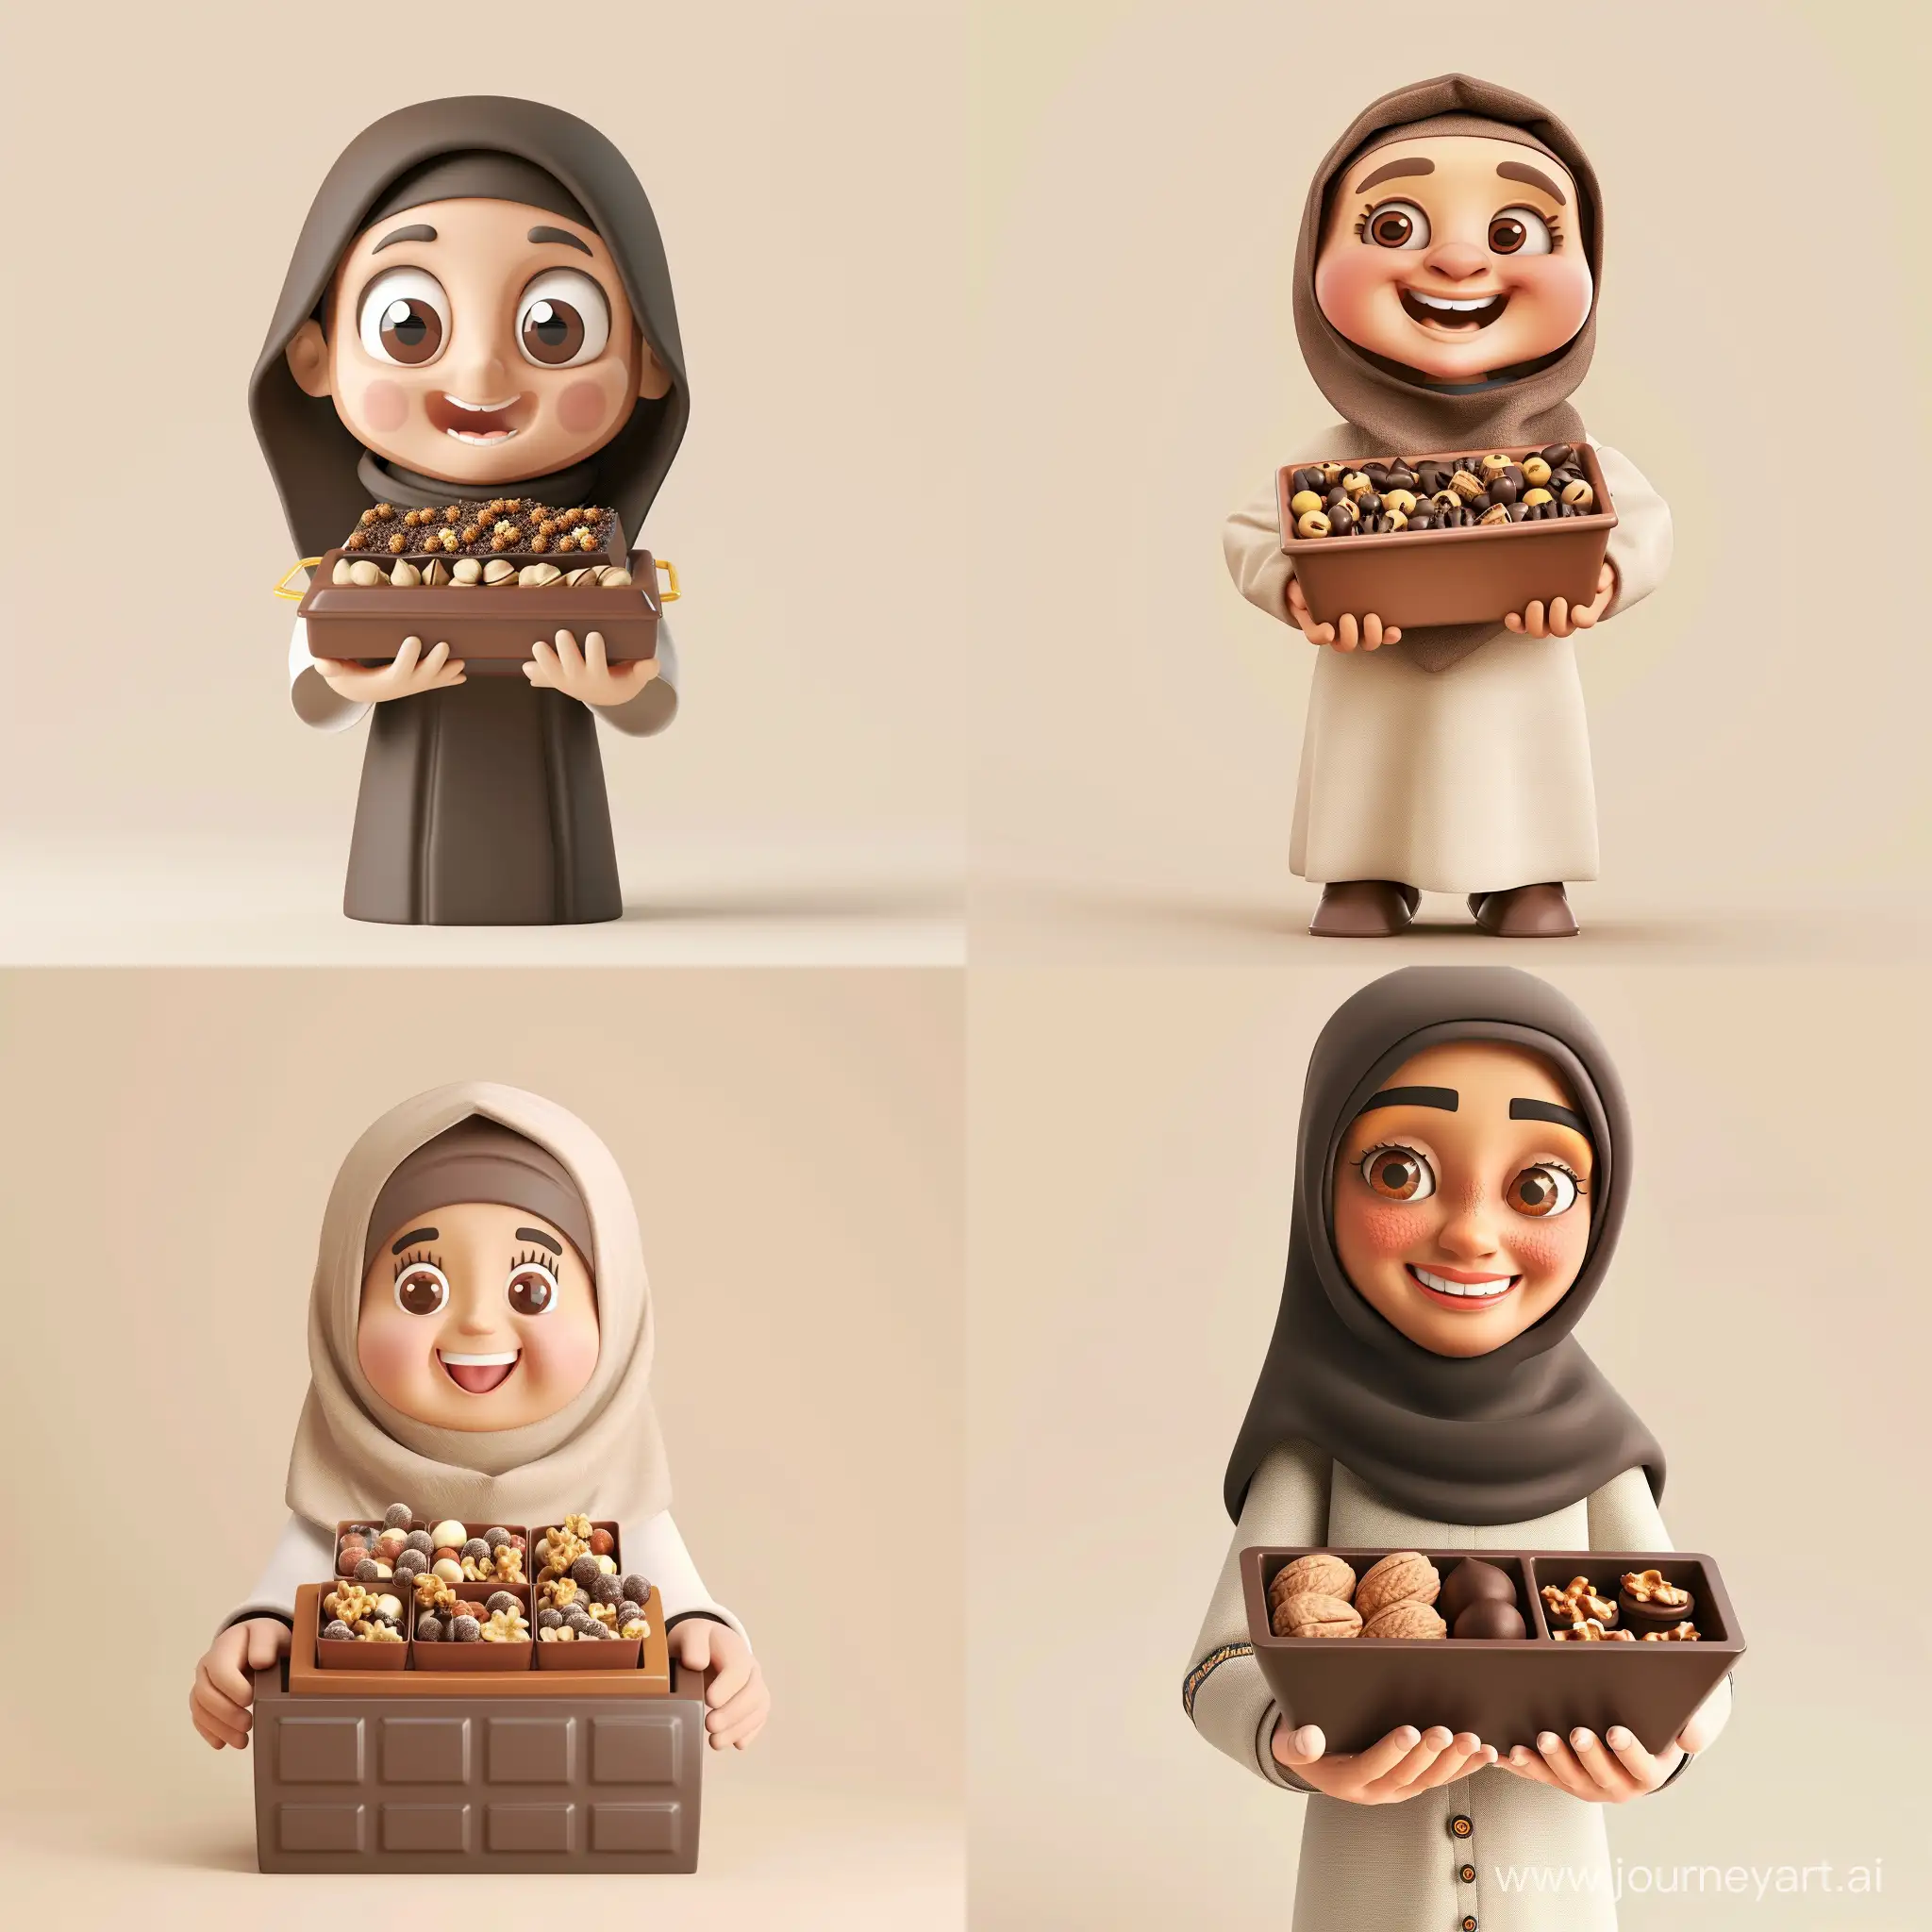 A cute Yemeni mother is holding a pot of chocolate candy with nuts and she is very happy. The background is light beige, the candy is rectangular, 3D style.